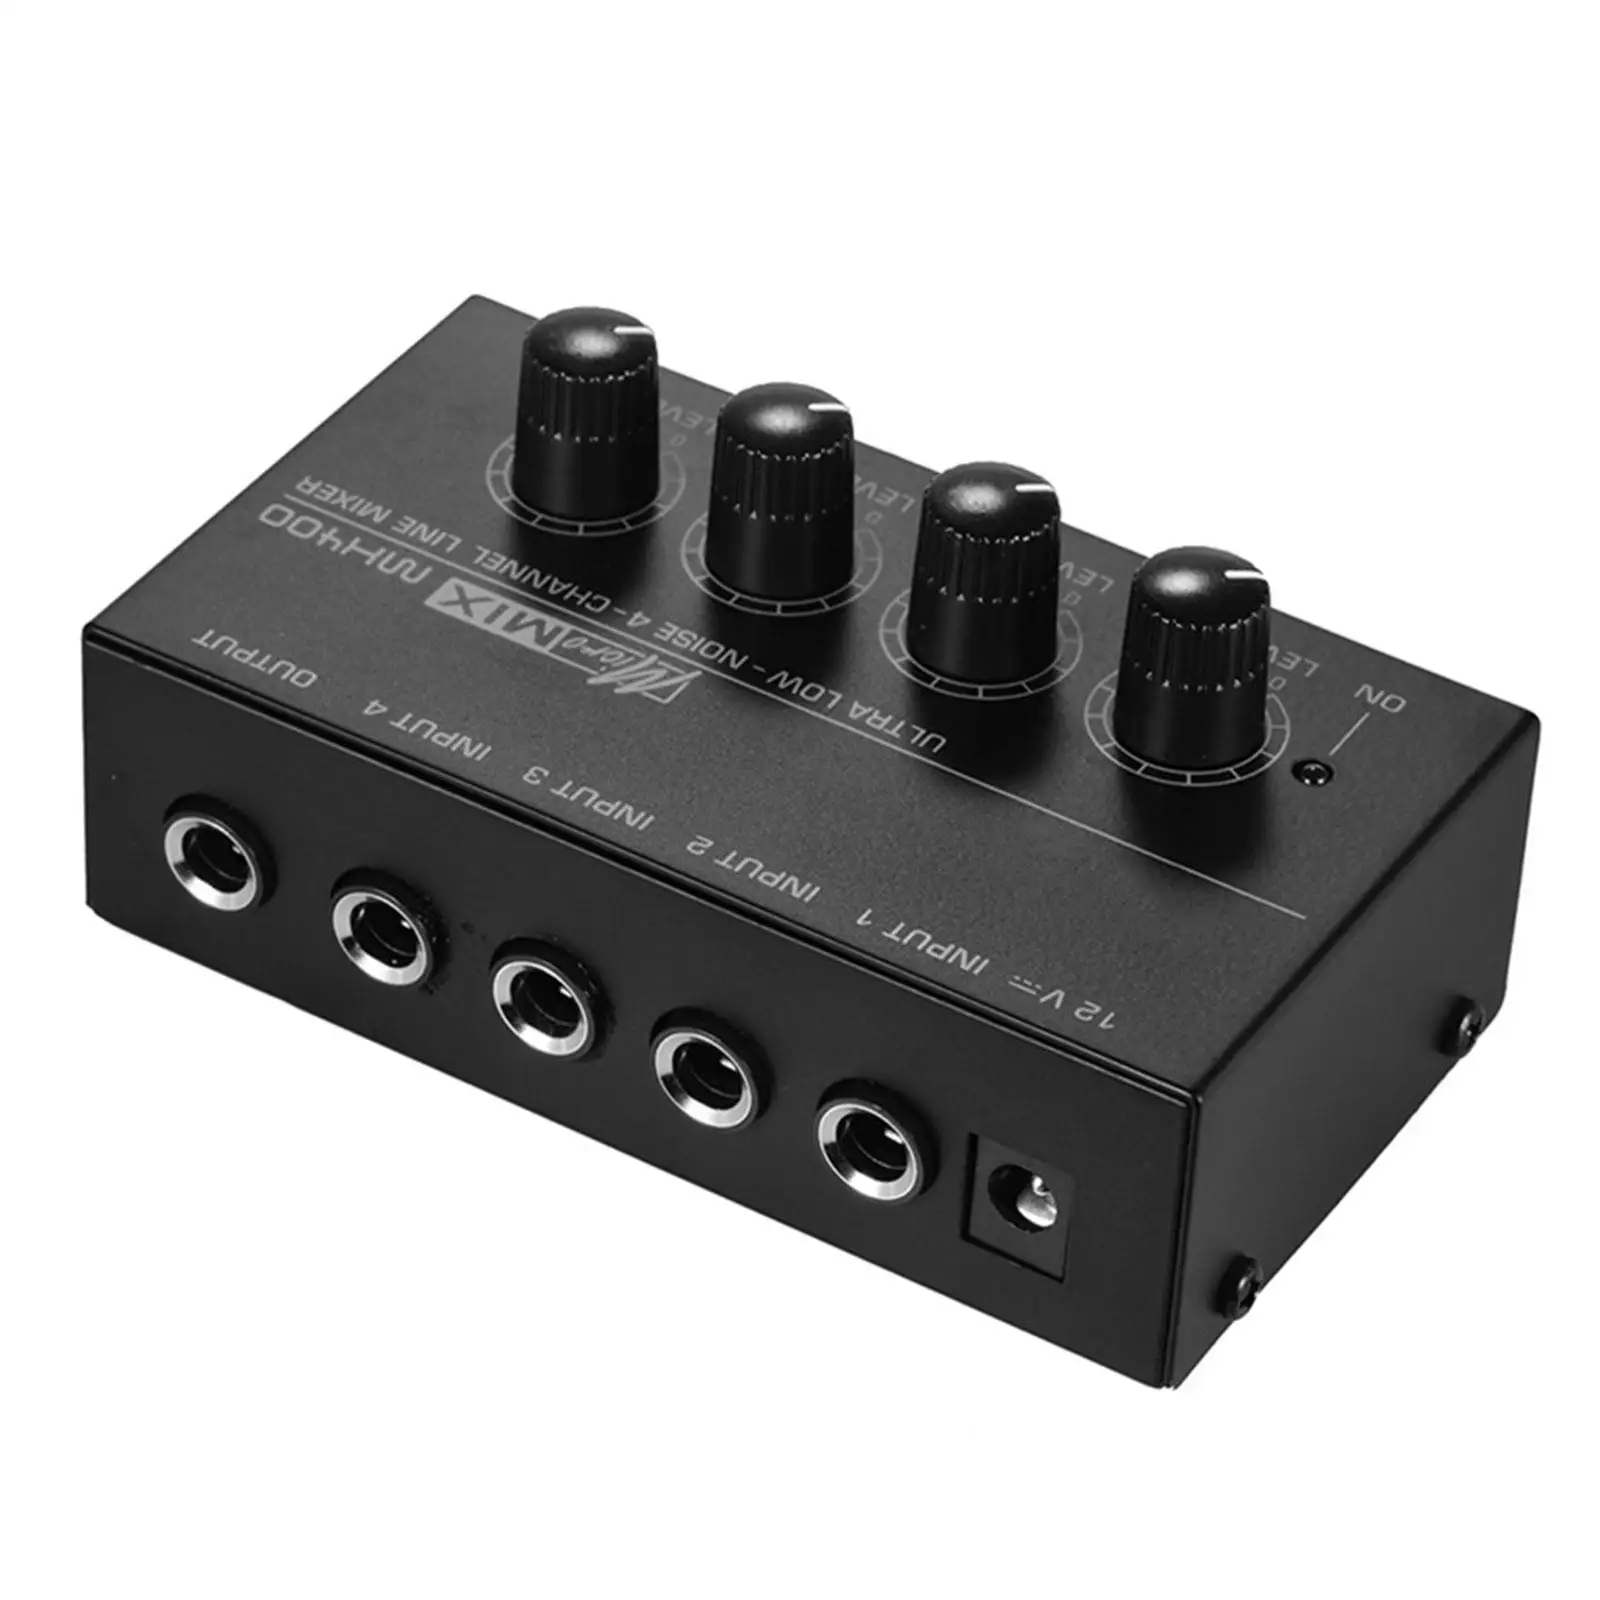 4 Channel Audio Mixer Equalizer Digital DJ Console Music Recording Equipment for Keyboards Karaoke Live Broadcasts Guitars Bars